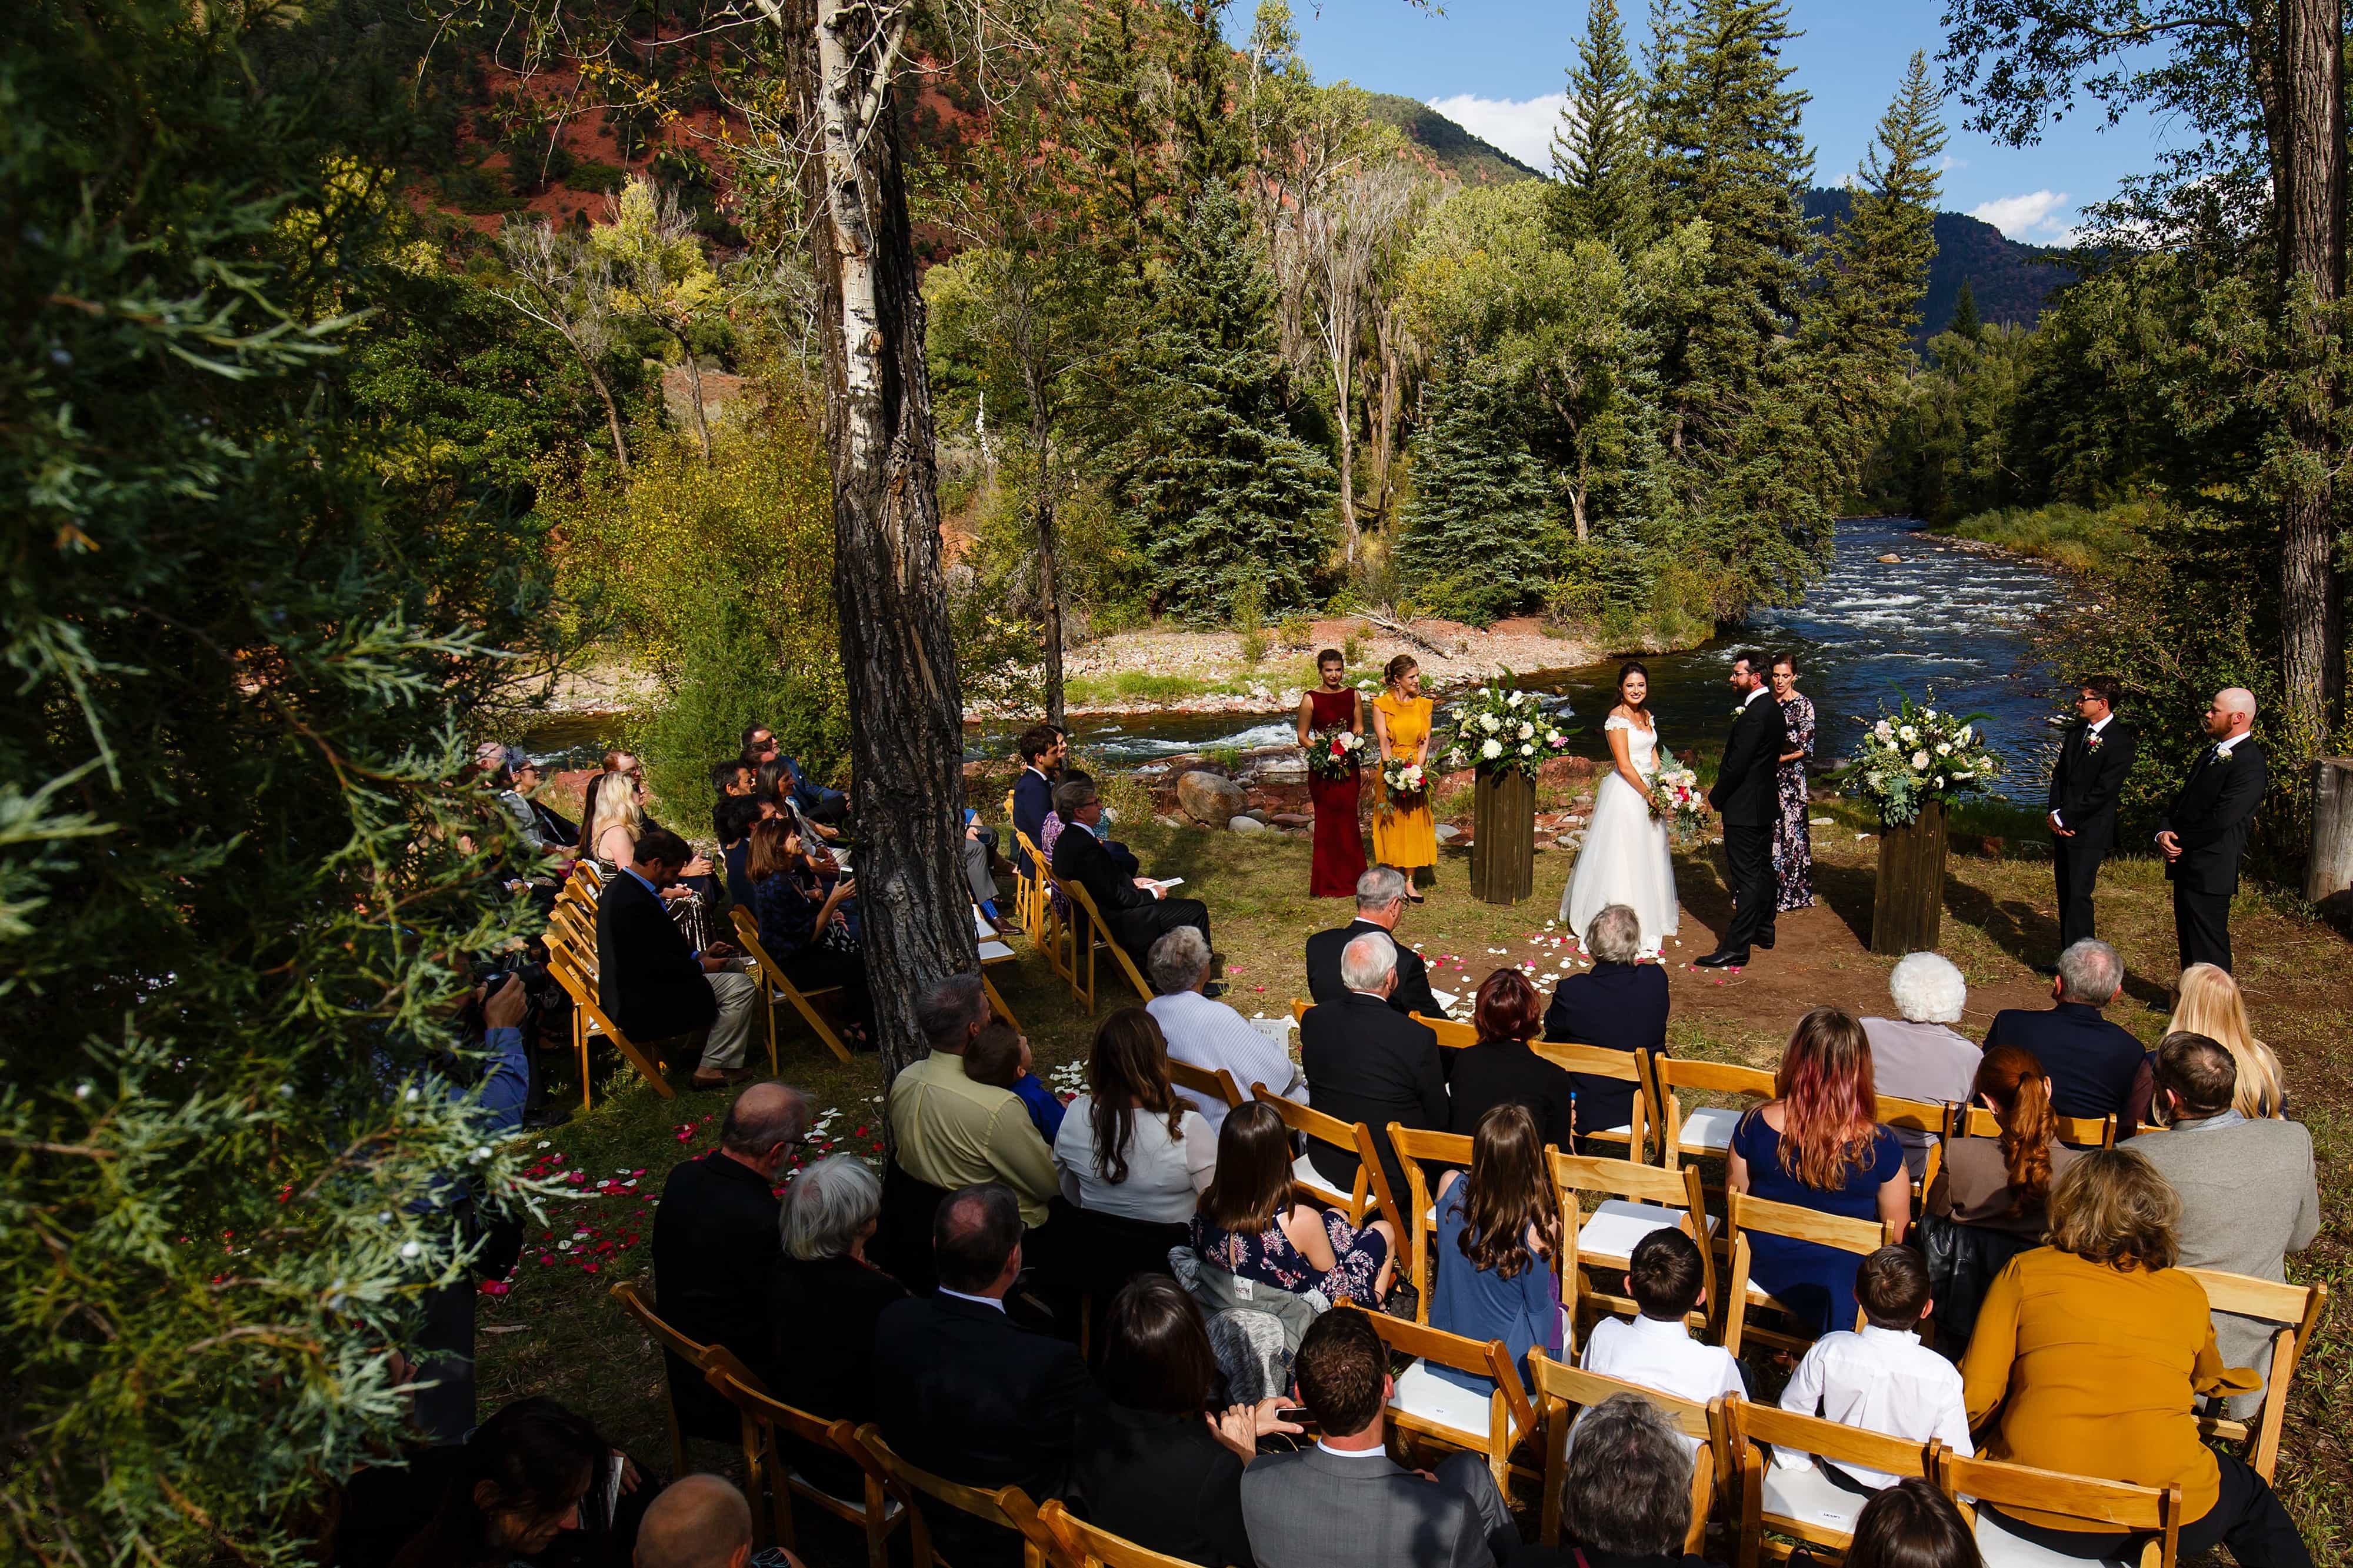 The couple looks out to guests as the creek rushes in the background during their fall wedding ceremony at Snowmass Cottages in Colorado